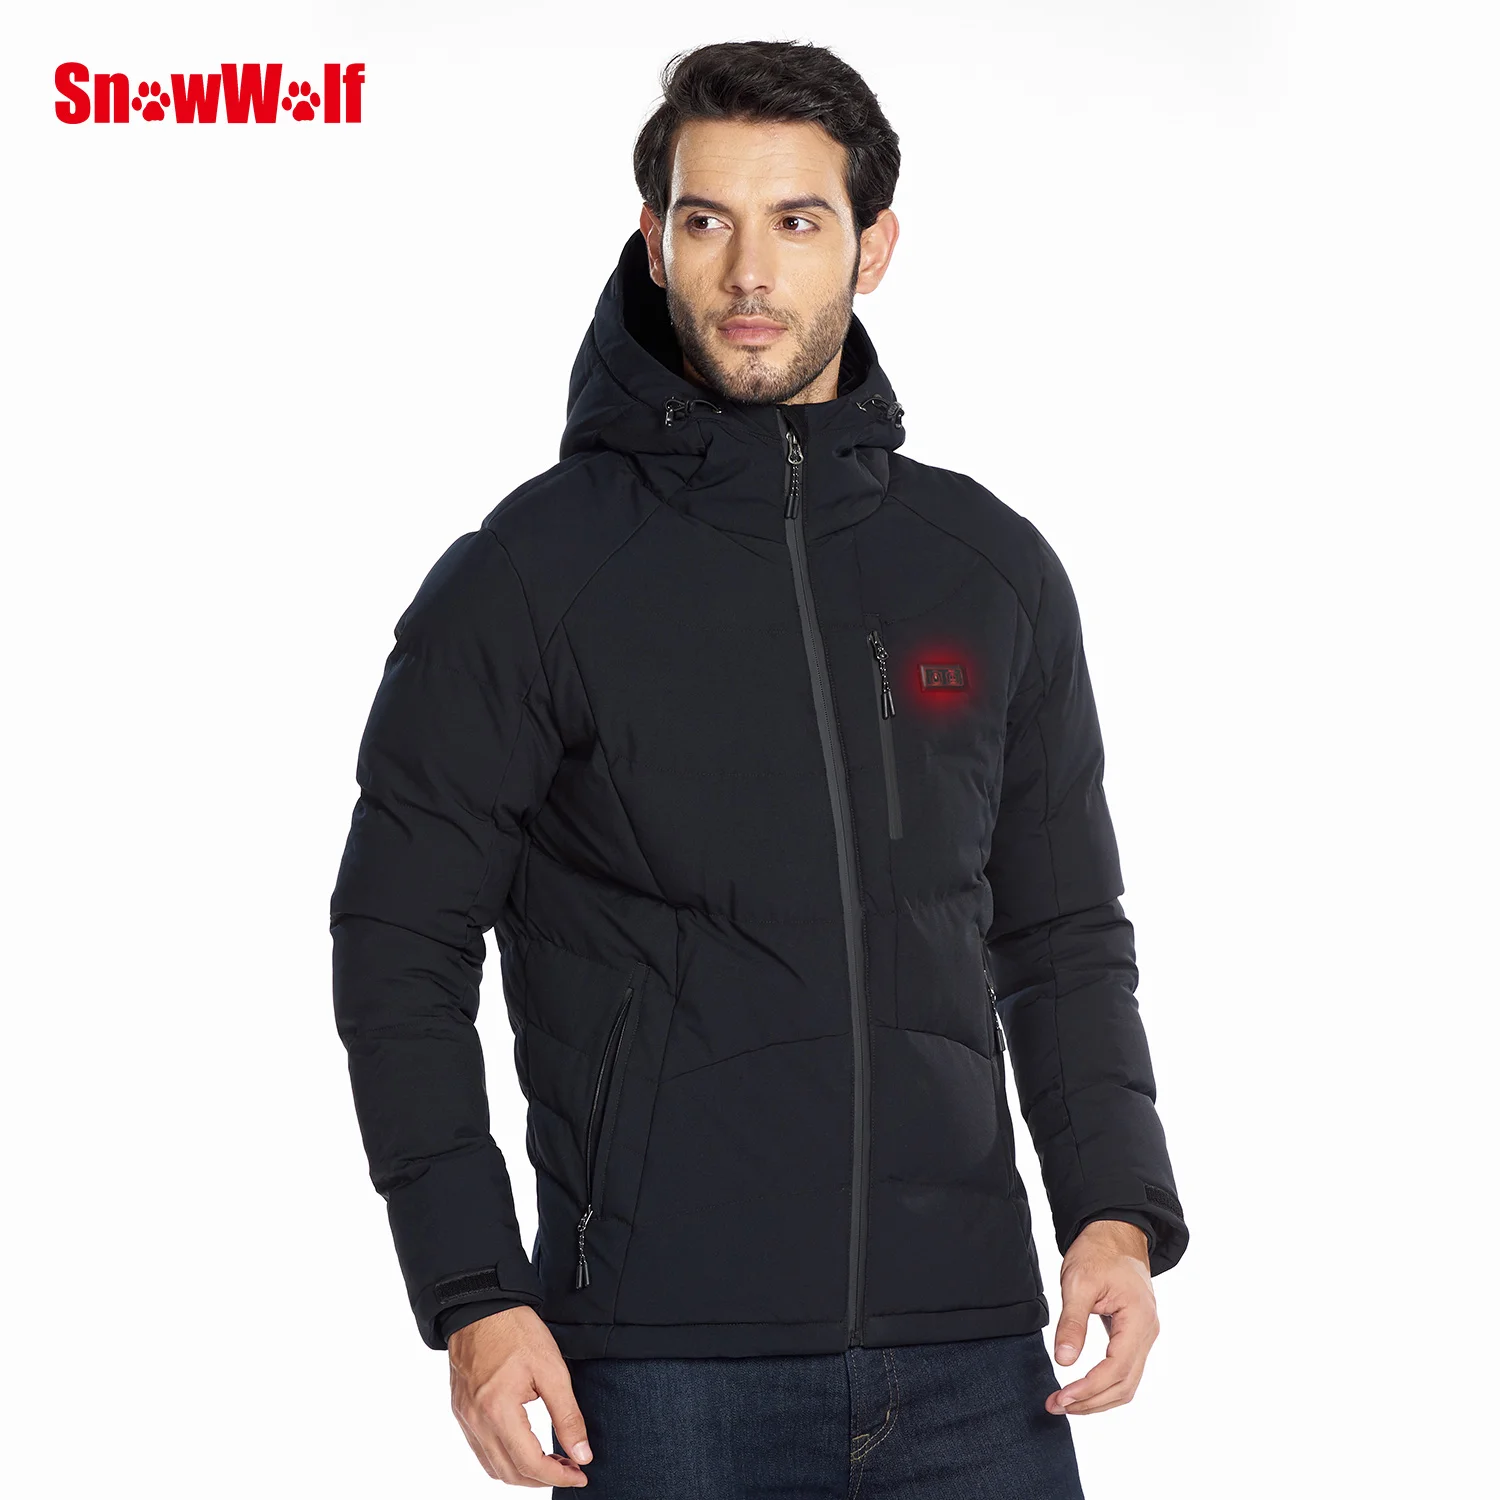 

Men's best heated jacket USB electric heated jacket heated clothing temperature controller heated coat winter jacket with hood